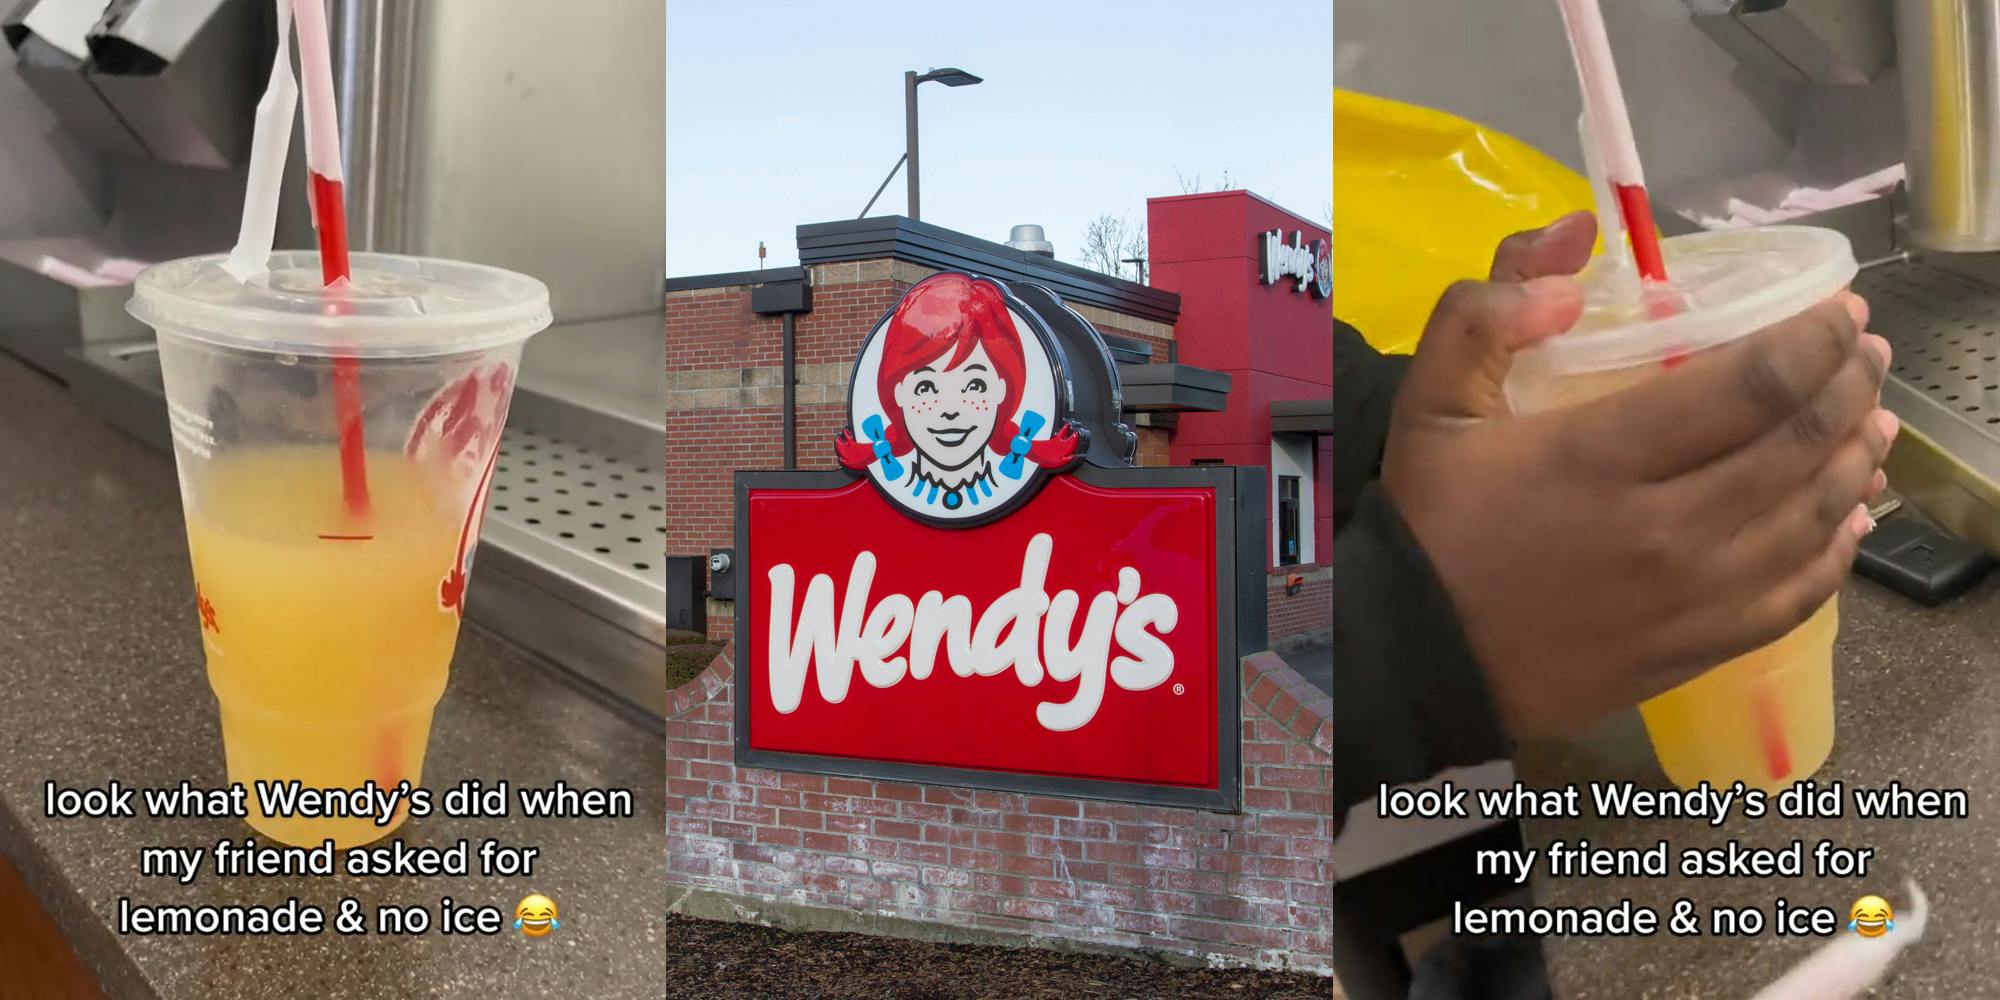 Wendy's lemonade half full with caption "look what Wendy's did when my friend asked for lemonade & no ice" (l) Wendy's building with sign out front (c) Wendy's lemonade half full in hands with caption "look what Wendy's did when my friend asked for lemonade & no ice" (r)